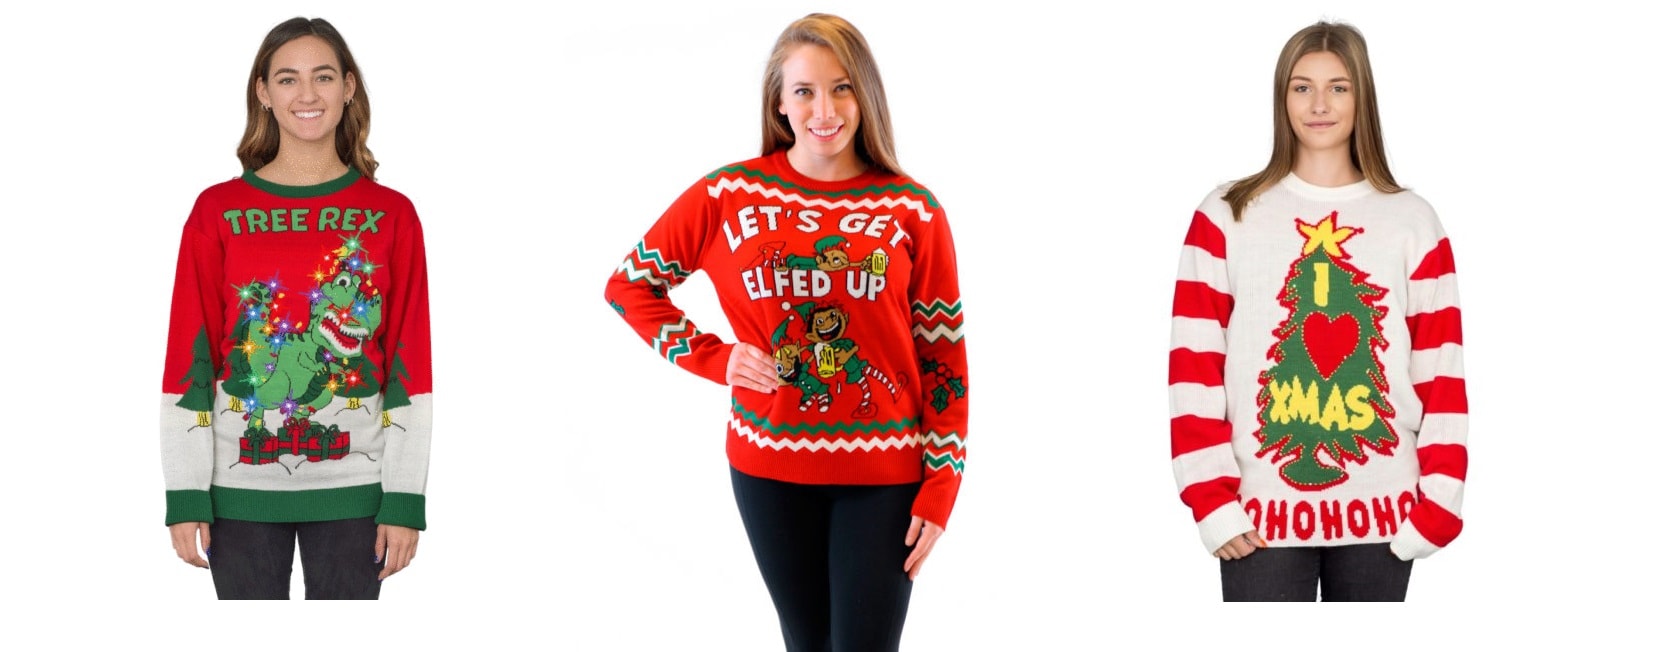 For all your Ugly Christmas Sweater needs, I recommend uglychristmassweater.com 